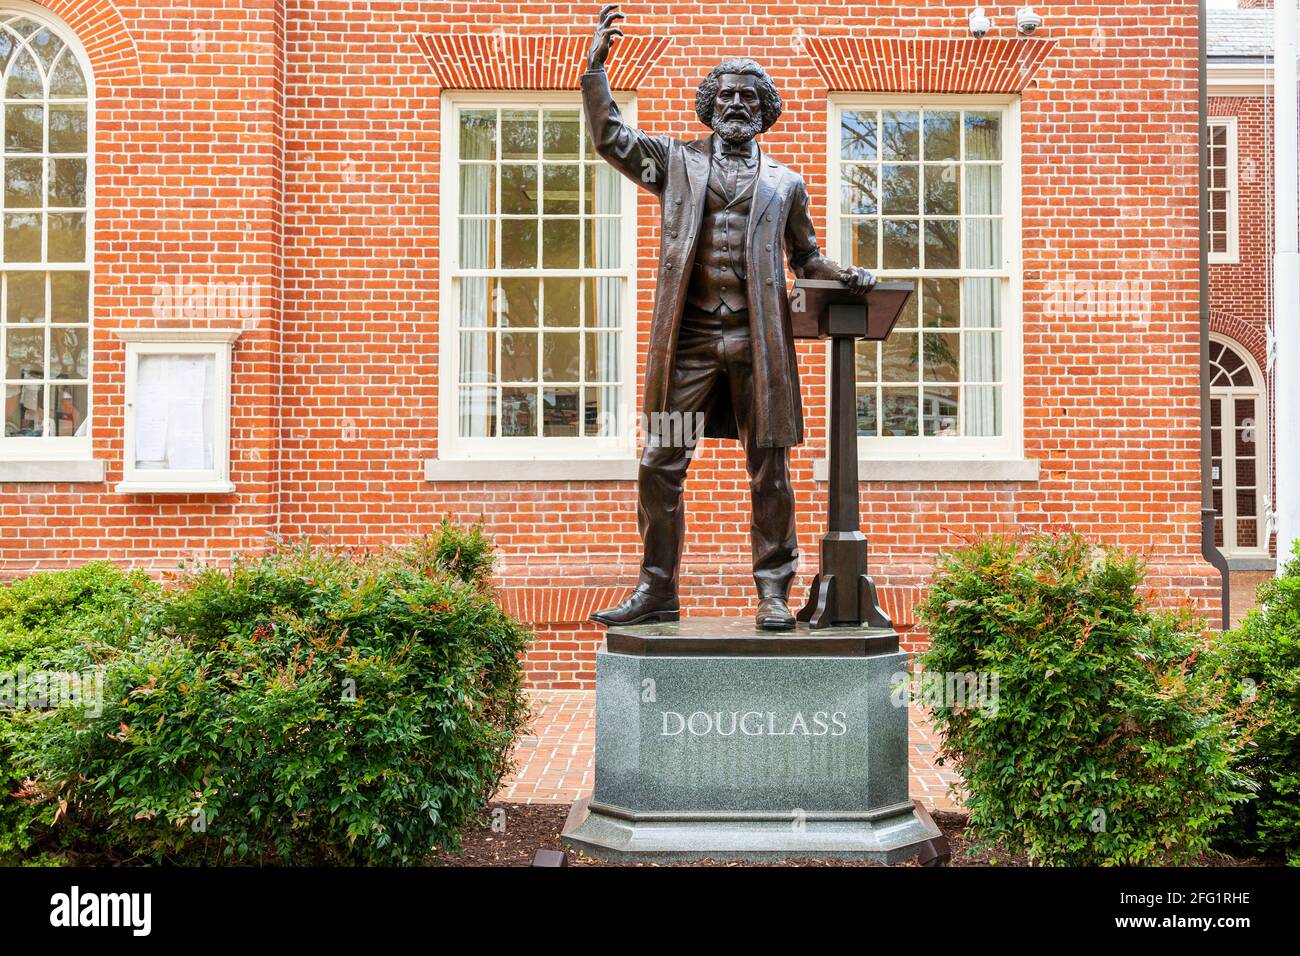 04-16-2021 Easton, MD, USA: Statue of the famous reformist abolitionist African American leader Frederick Douglass, in front of the Talbot County Cour Stock Photo